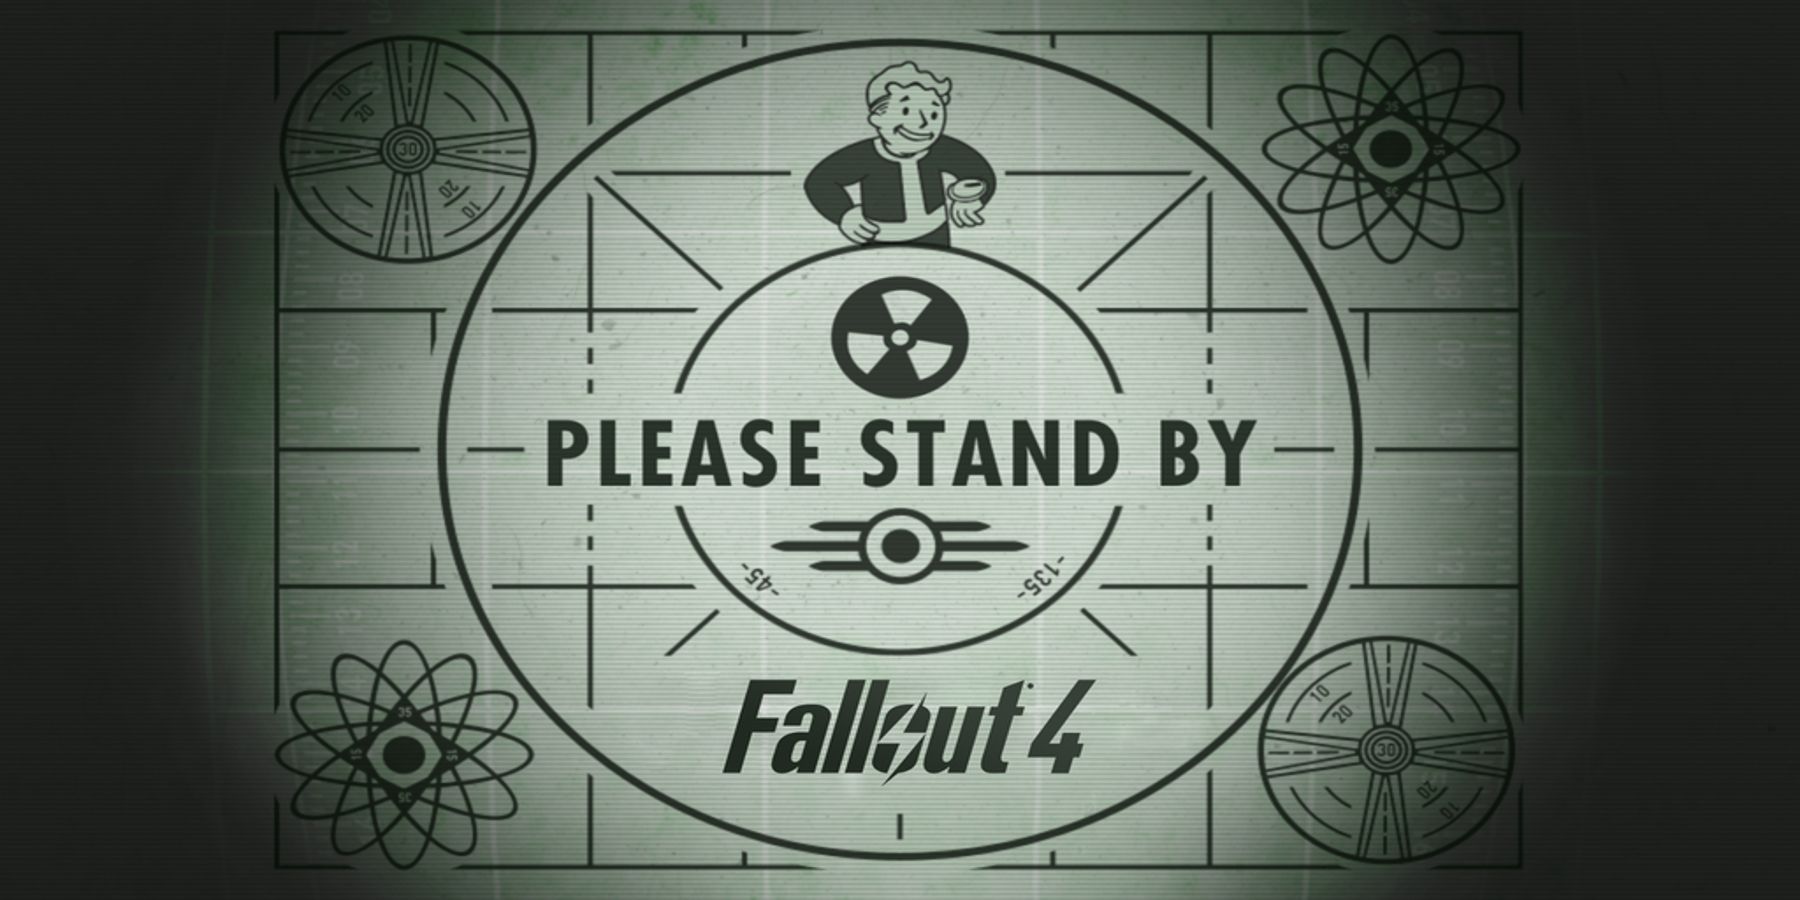 Fallout 4 Please Stand By